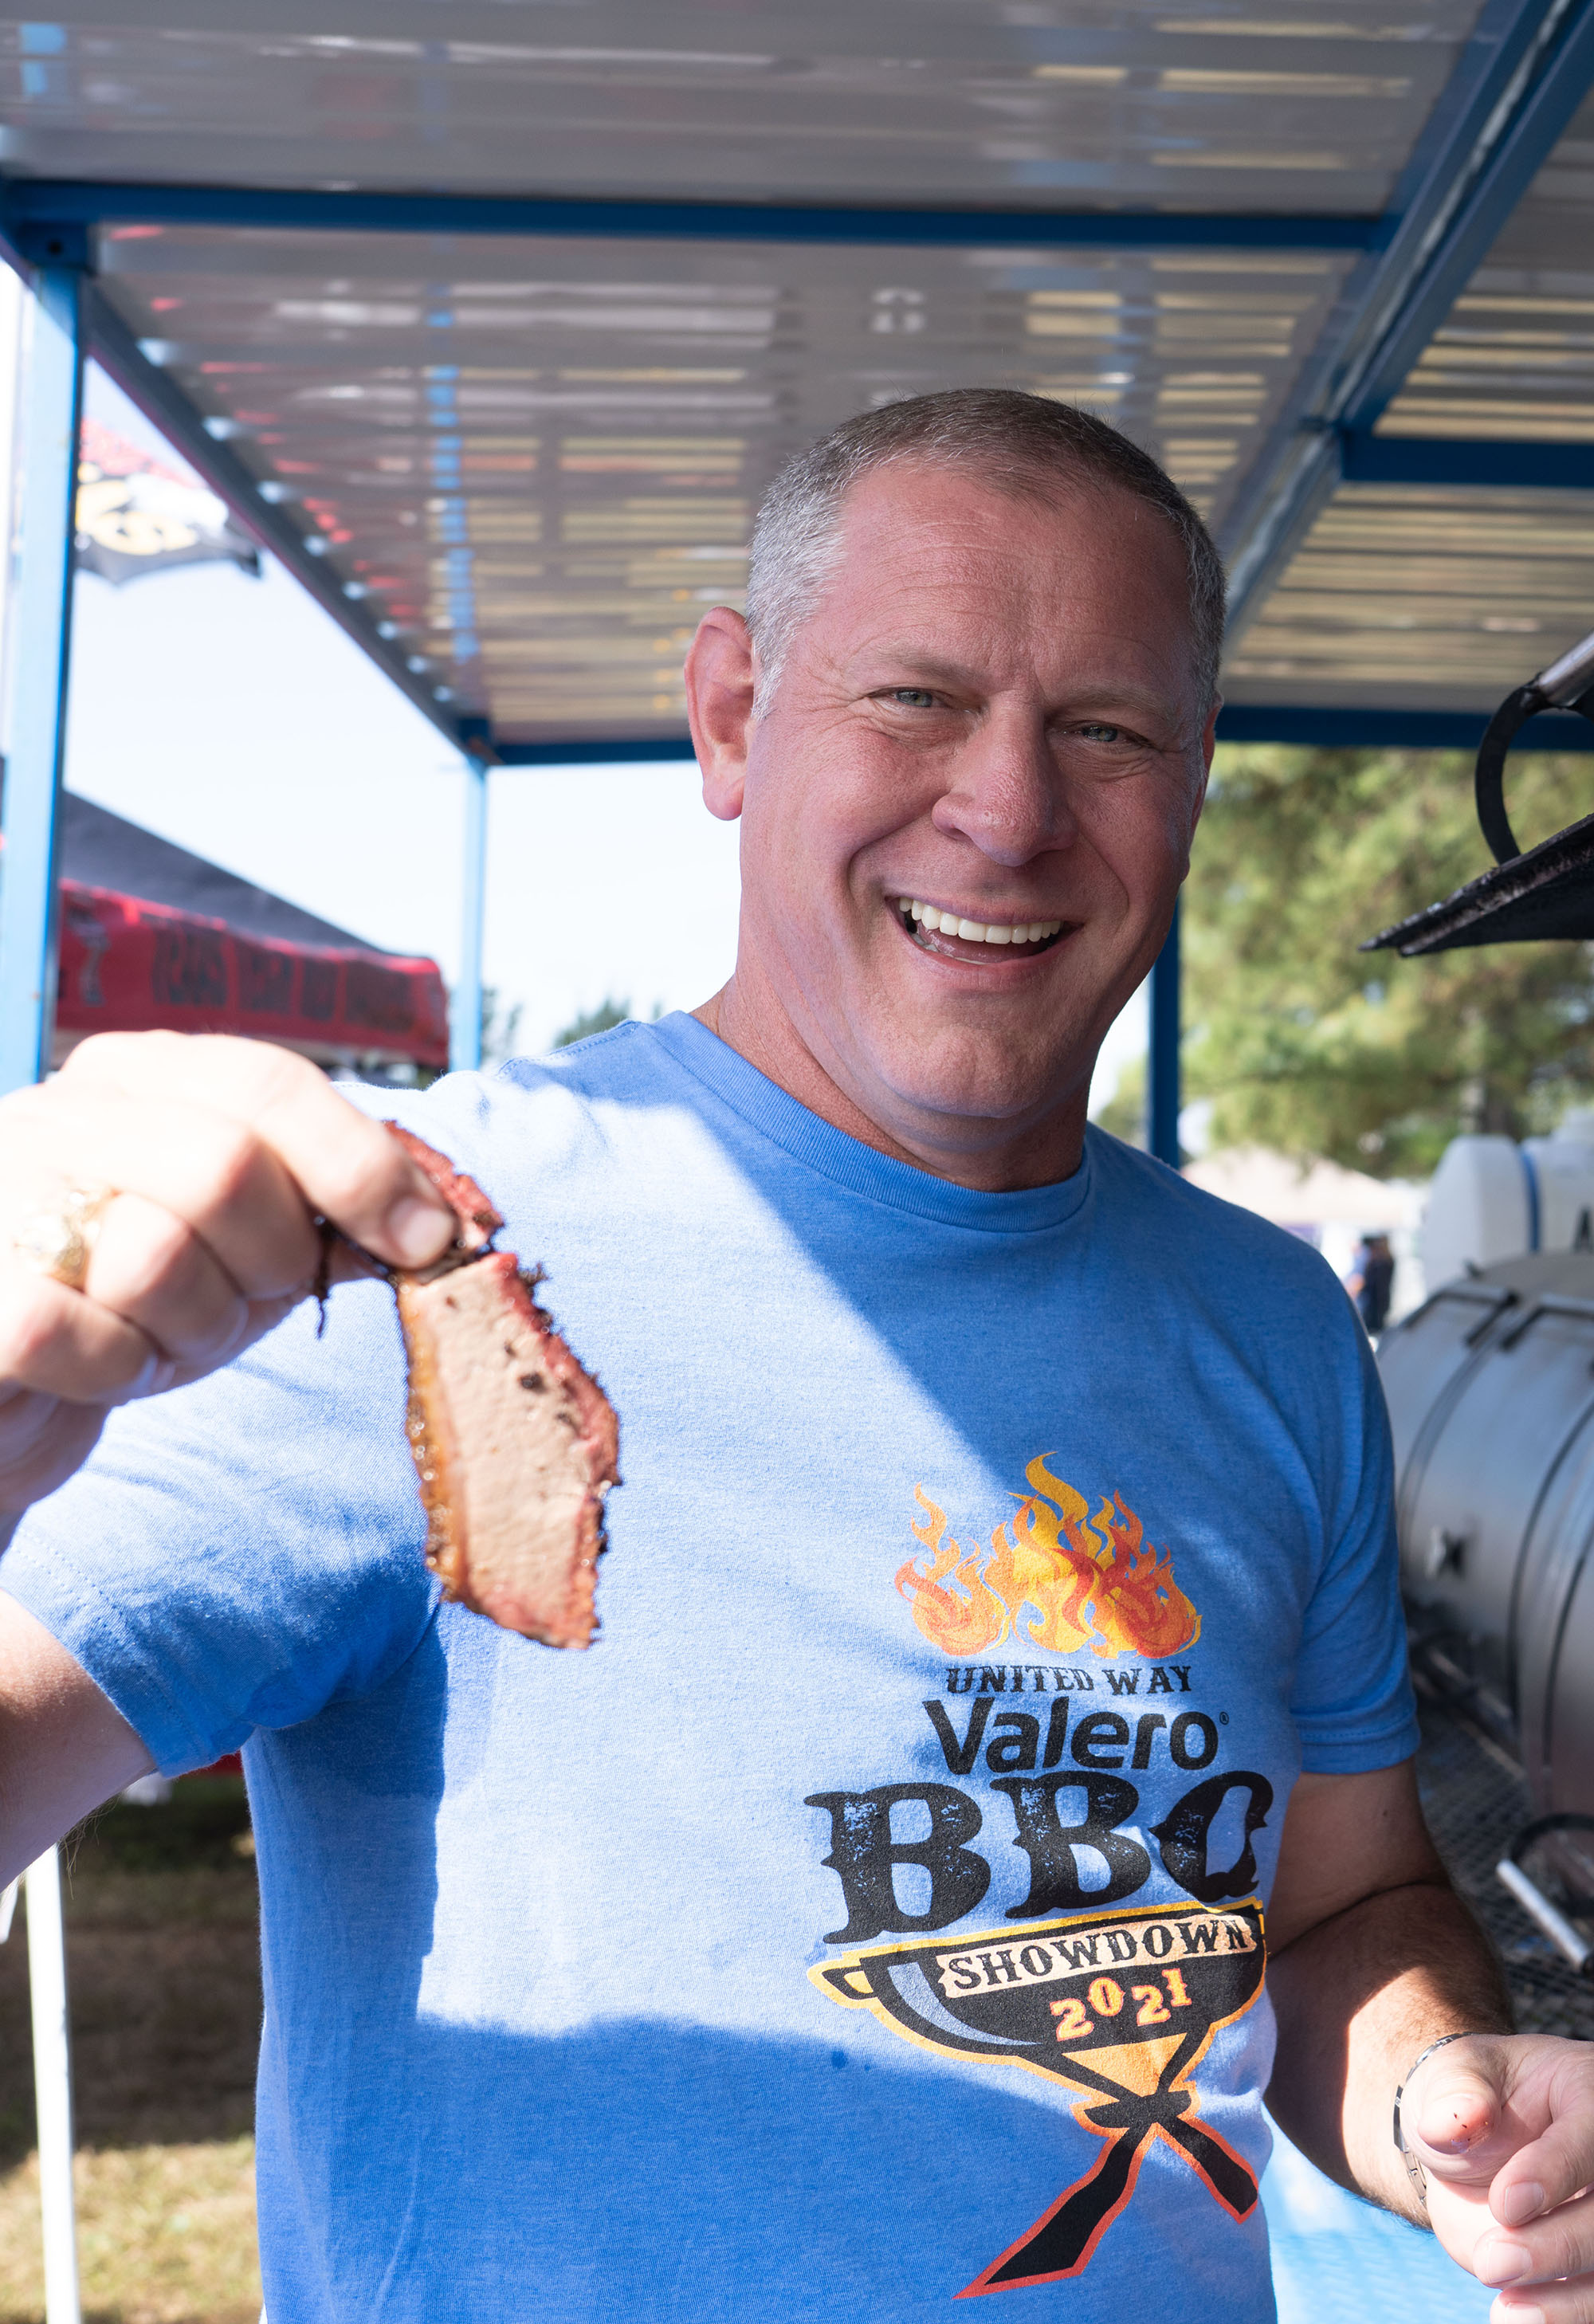 Man holds piece of brisket and smiles